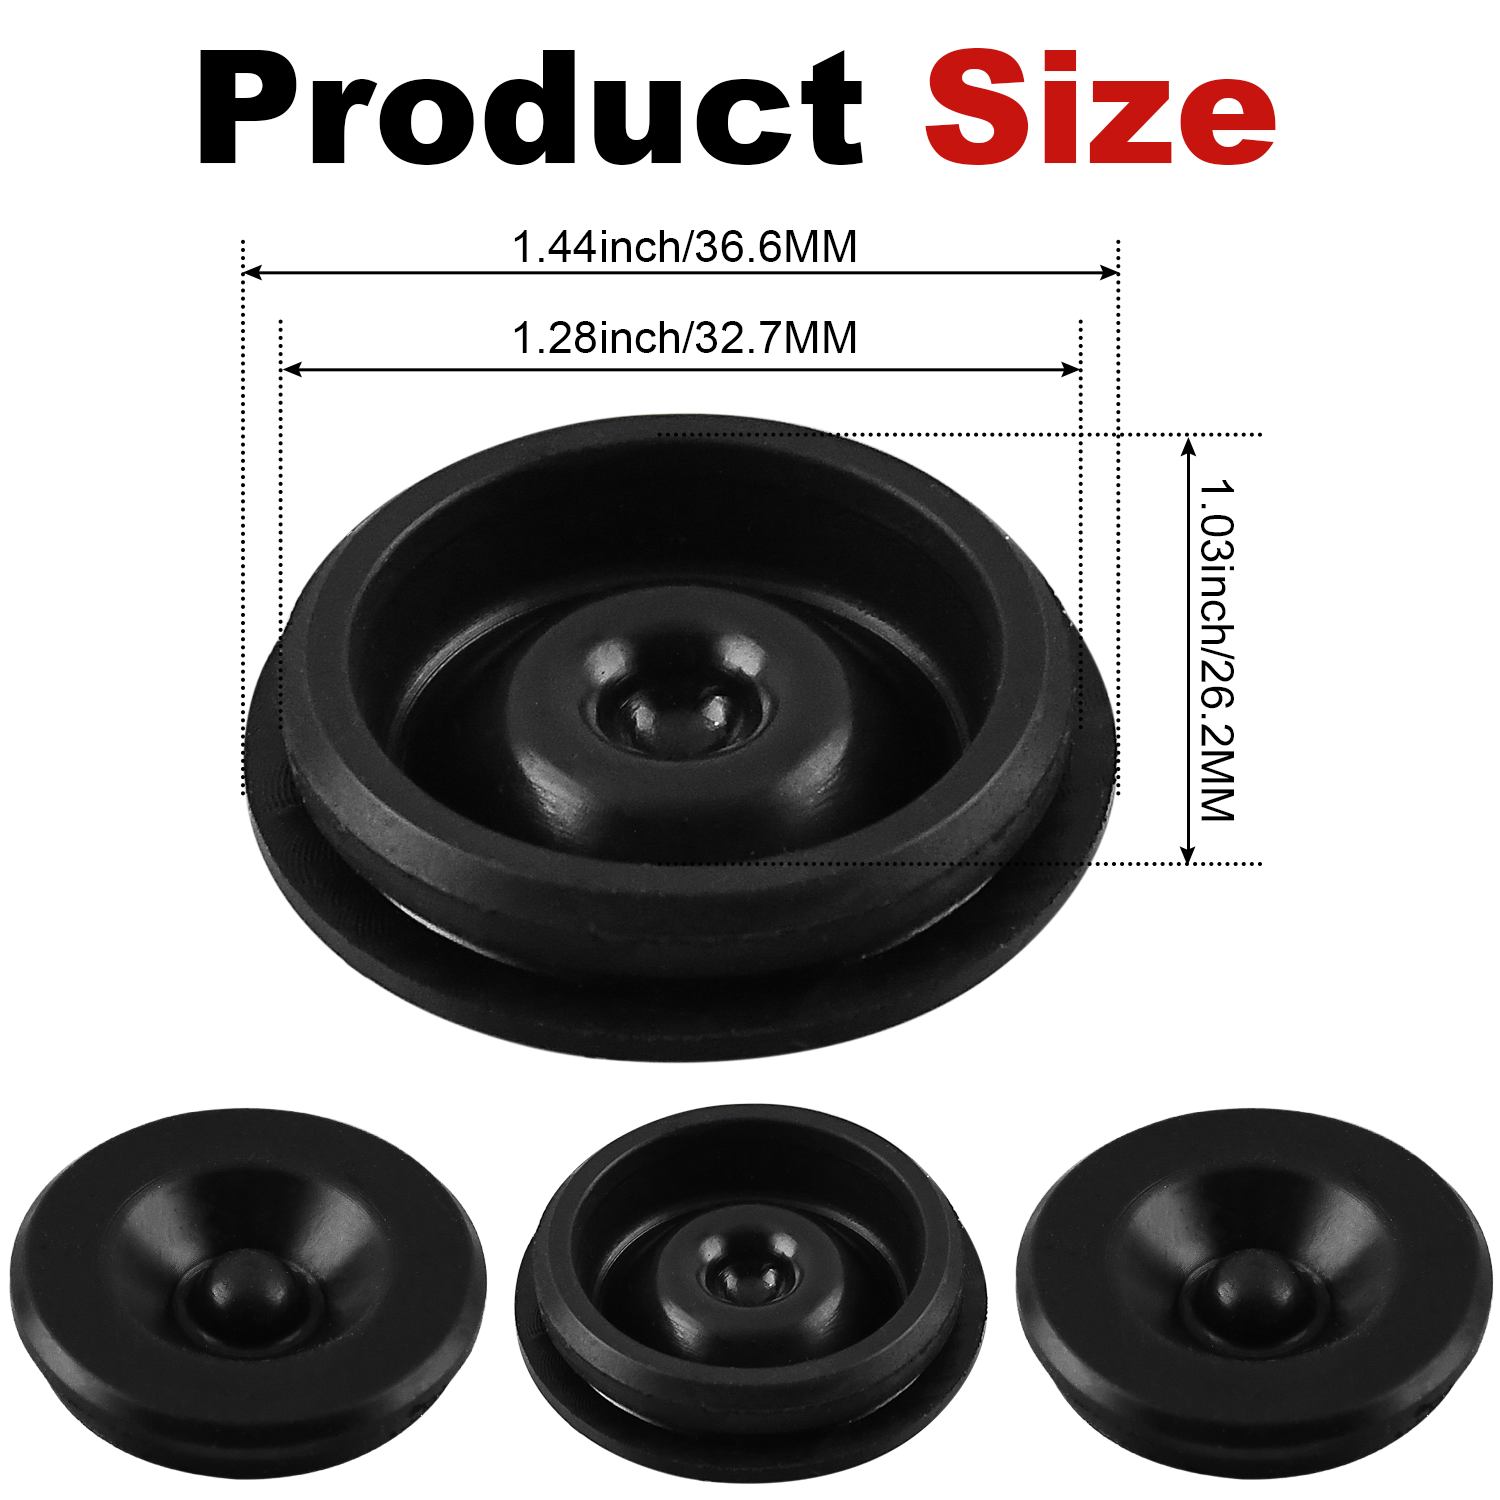 Trailer Axle Dust Cap Cup Grease Cover 1.98" Hub with Extra 2 Rubber Plugs,Trailer Axle Wheel Hub and Bearing Dust Cap for Most 2000 to 3500 Pound Axles Dexter